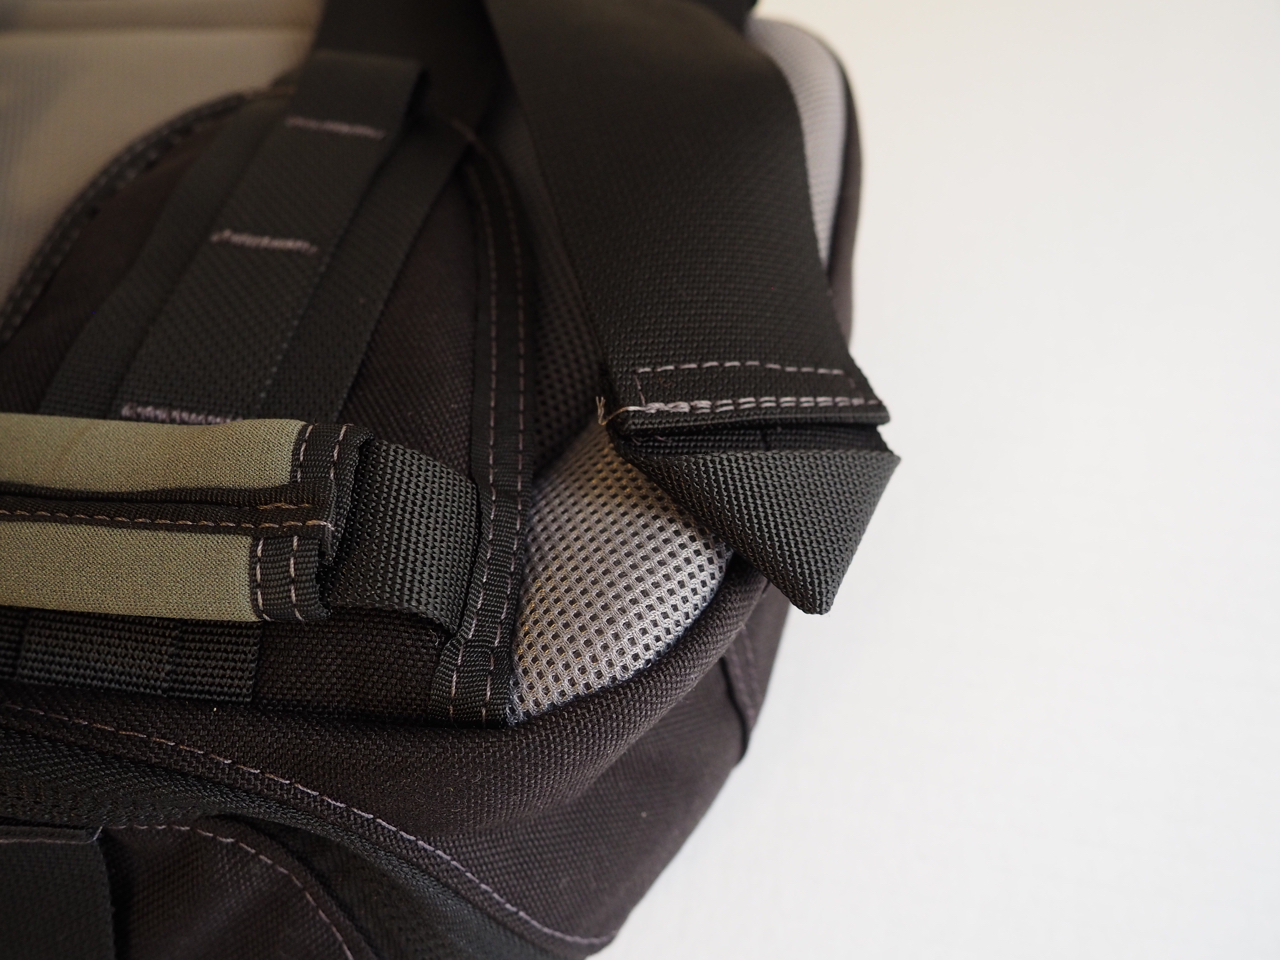 Note how the end of the strap is folded over into a triangle